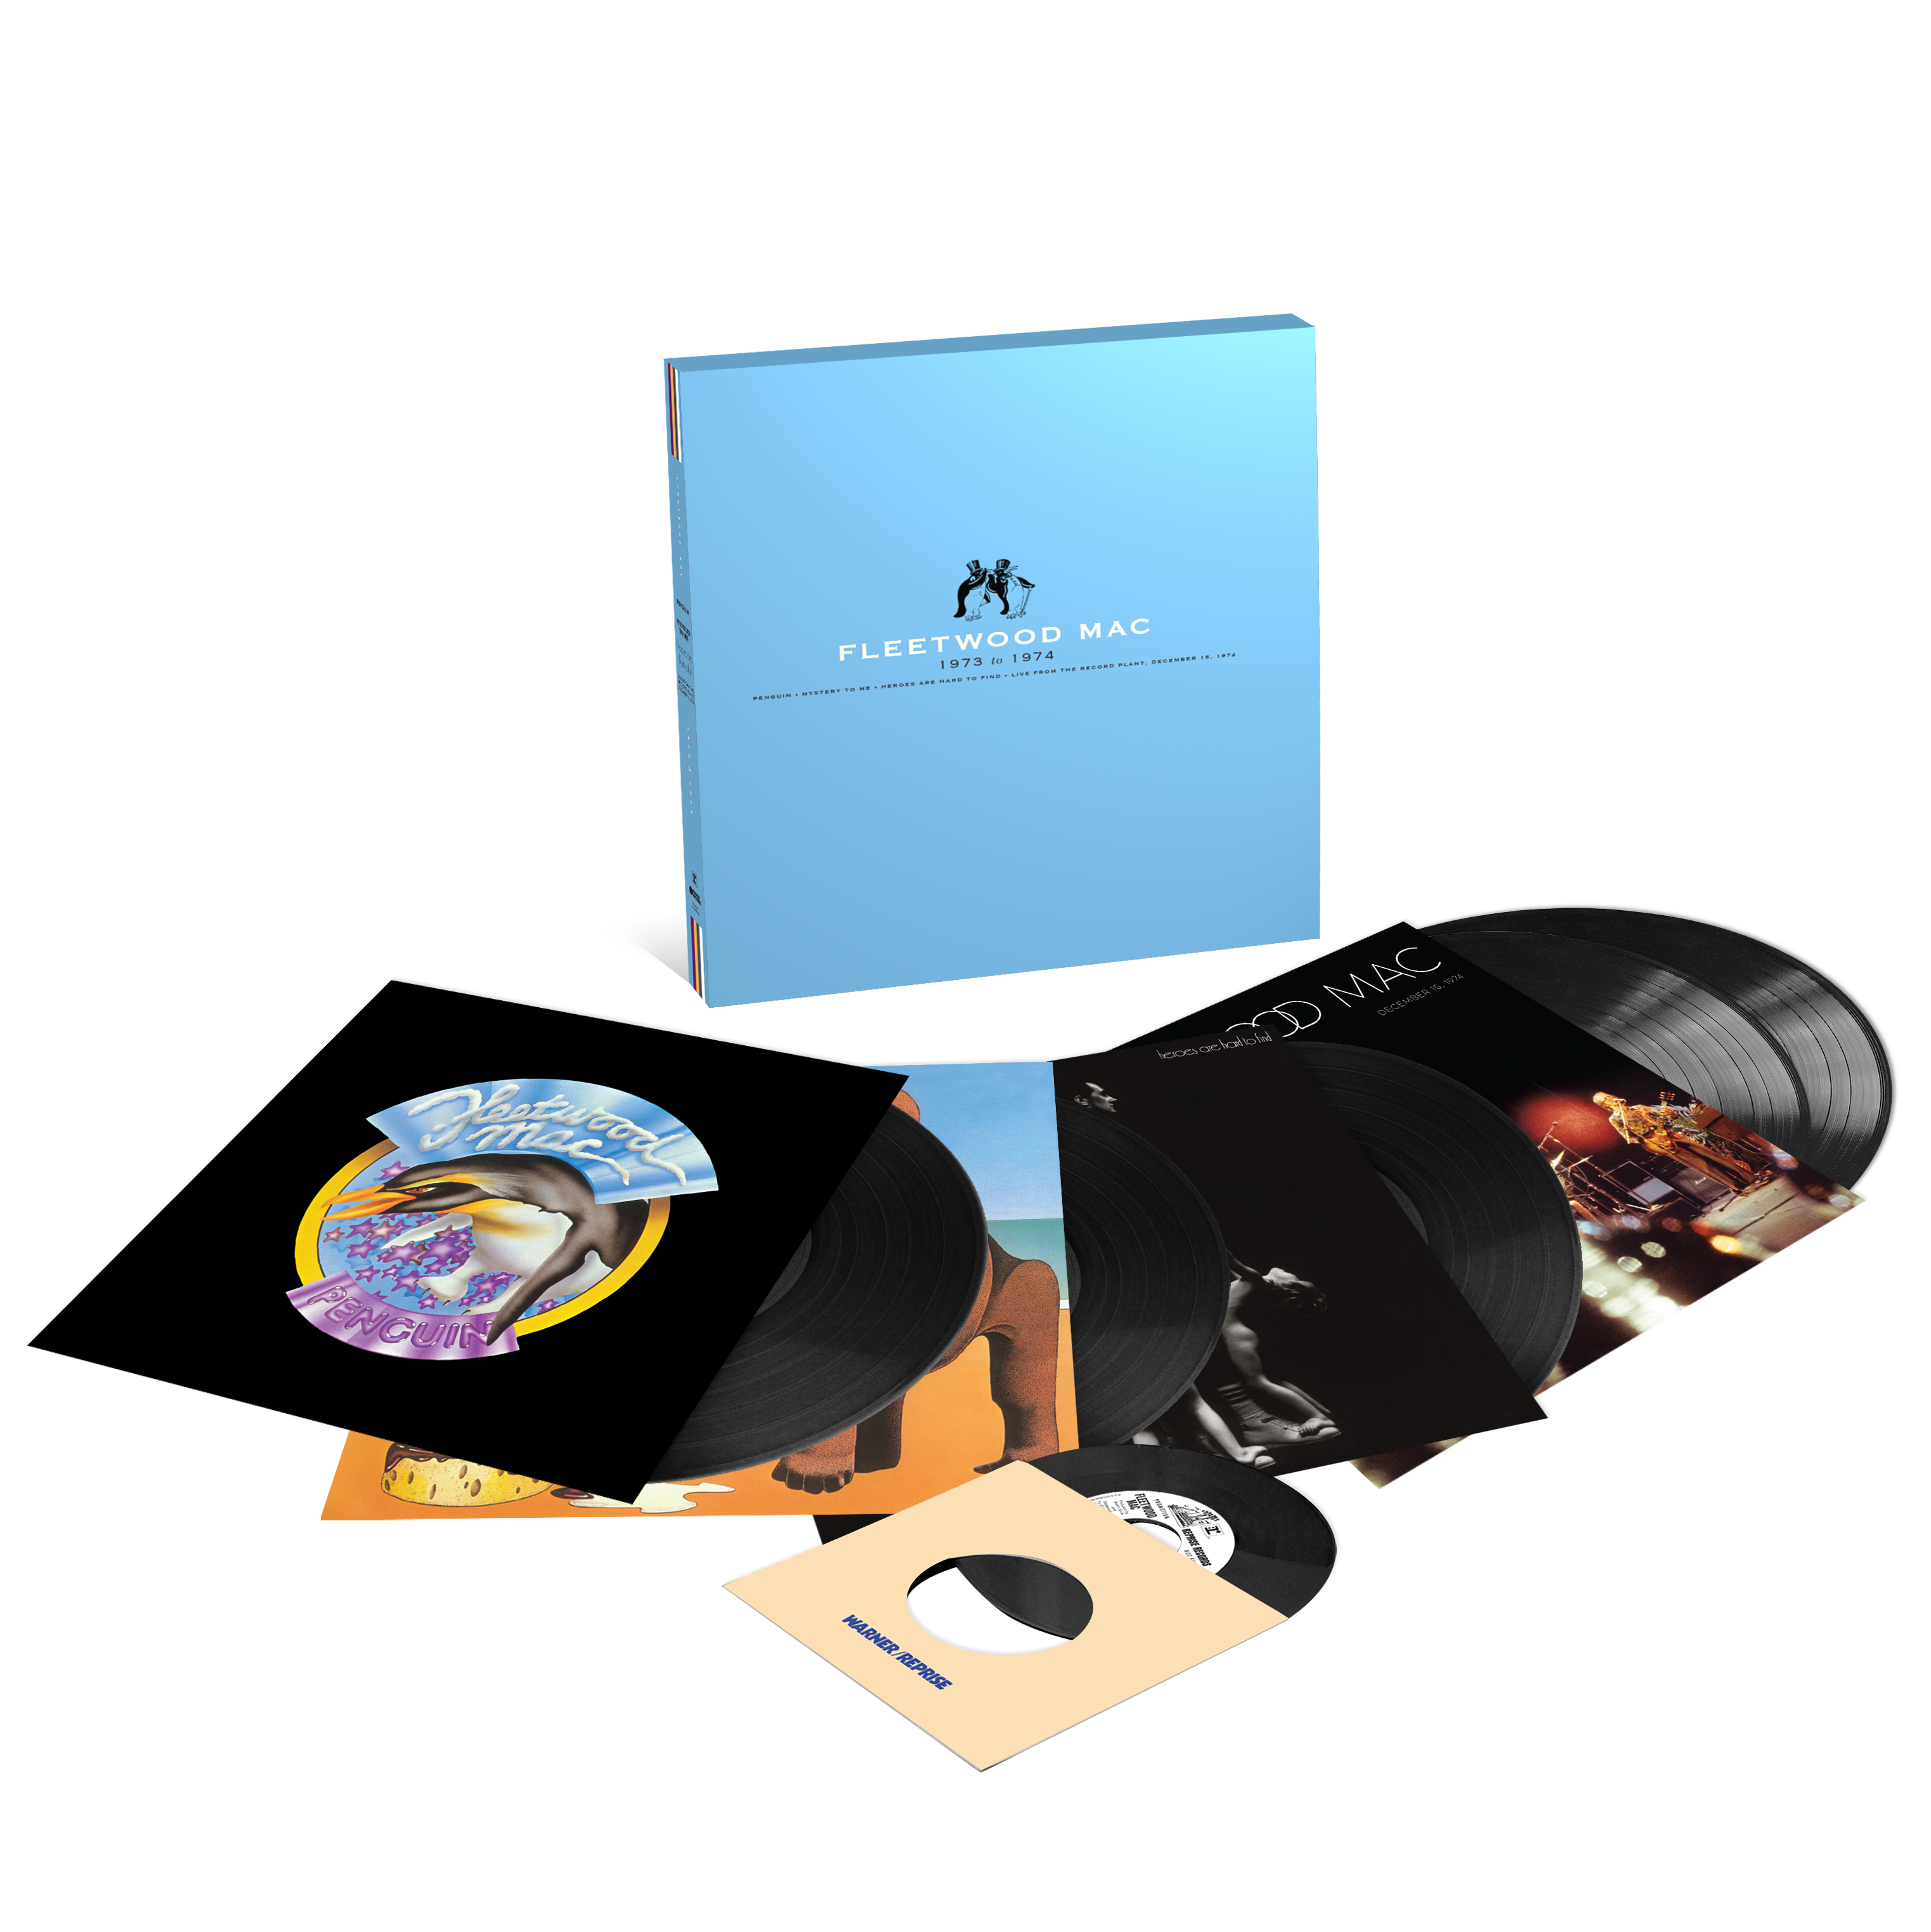 Twitter Image, The studio albums live recording and 7 vinyl